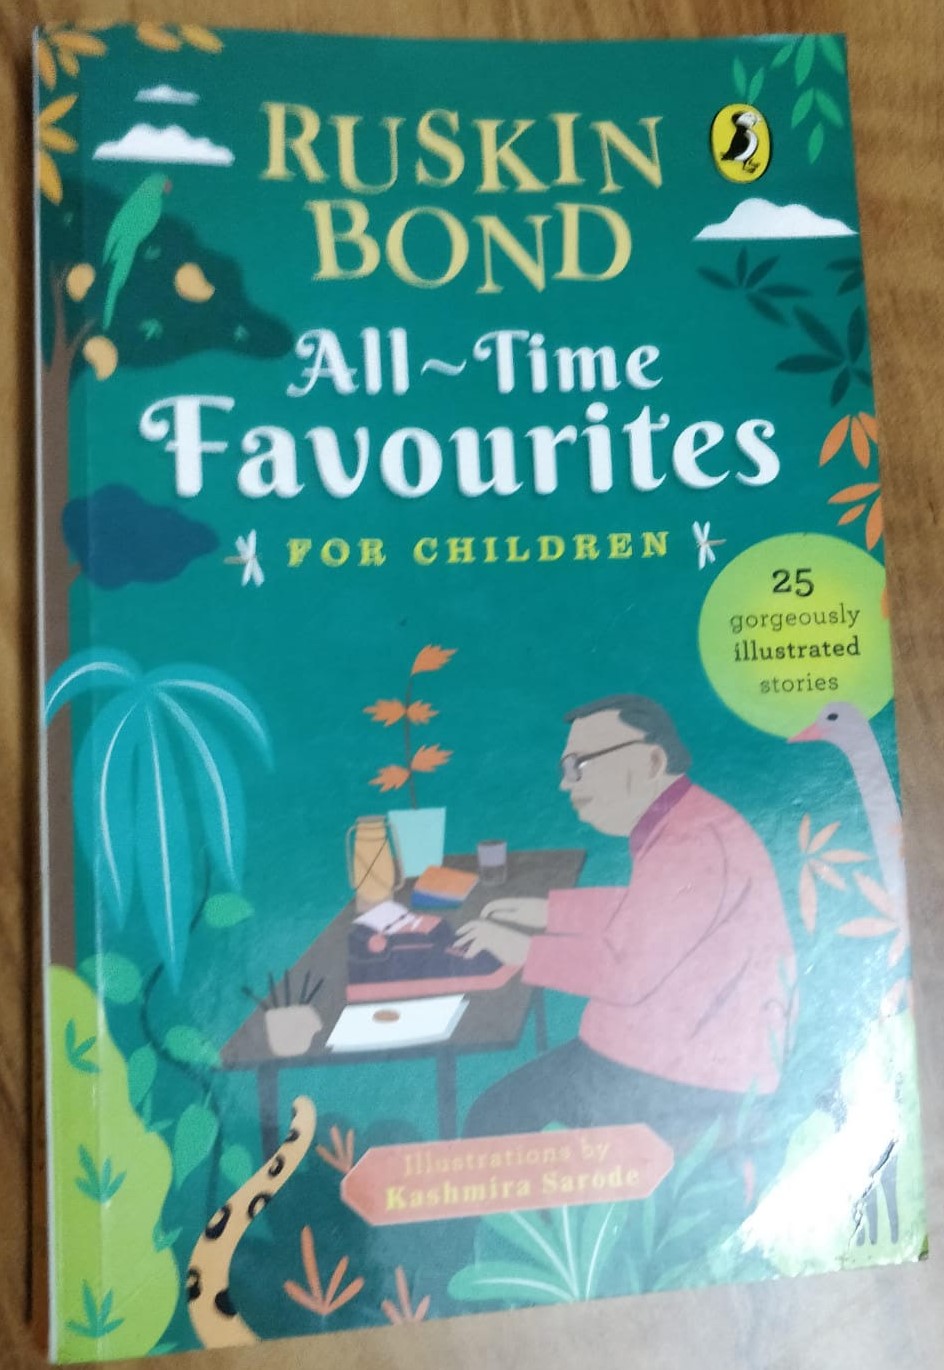 Review: All-Time Favourites For Children